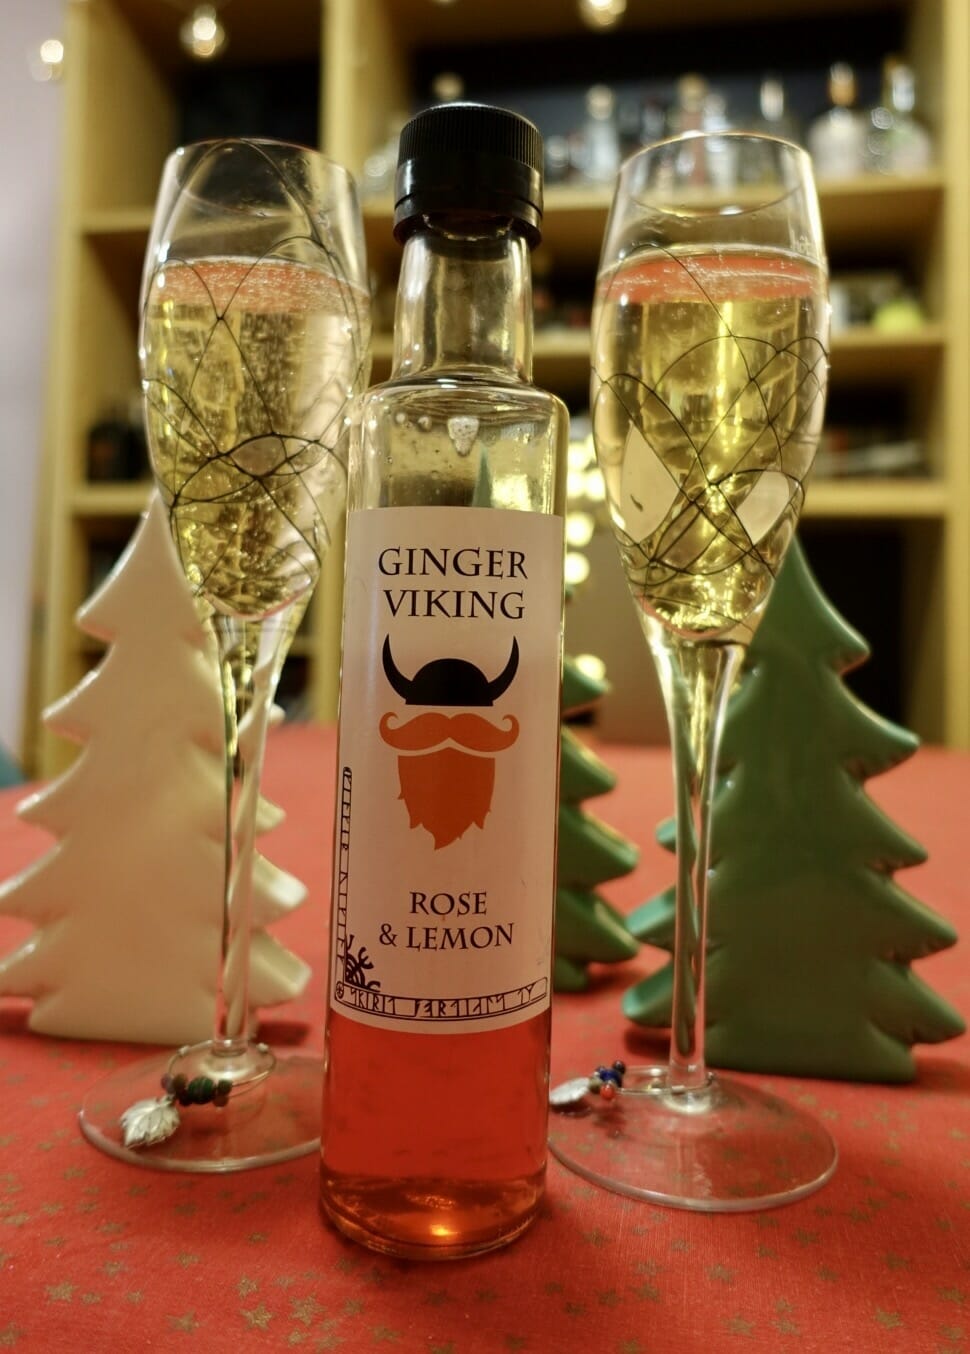 Festive drinks - more than just gin! On What's Katie Doing? blog